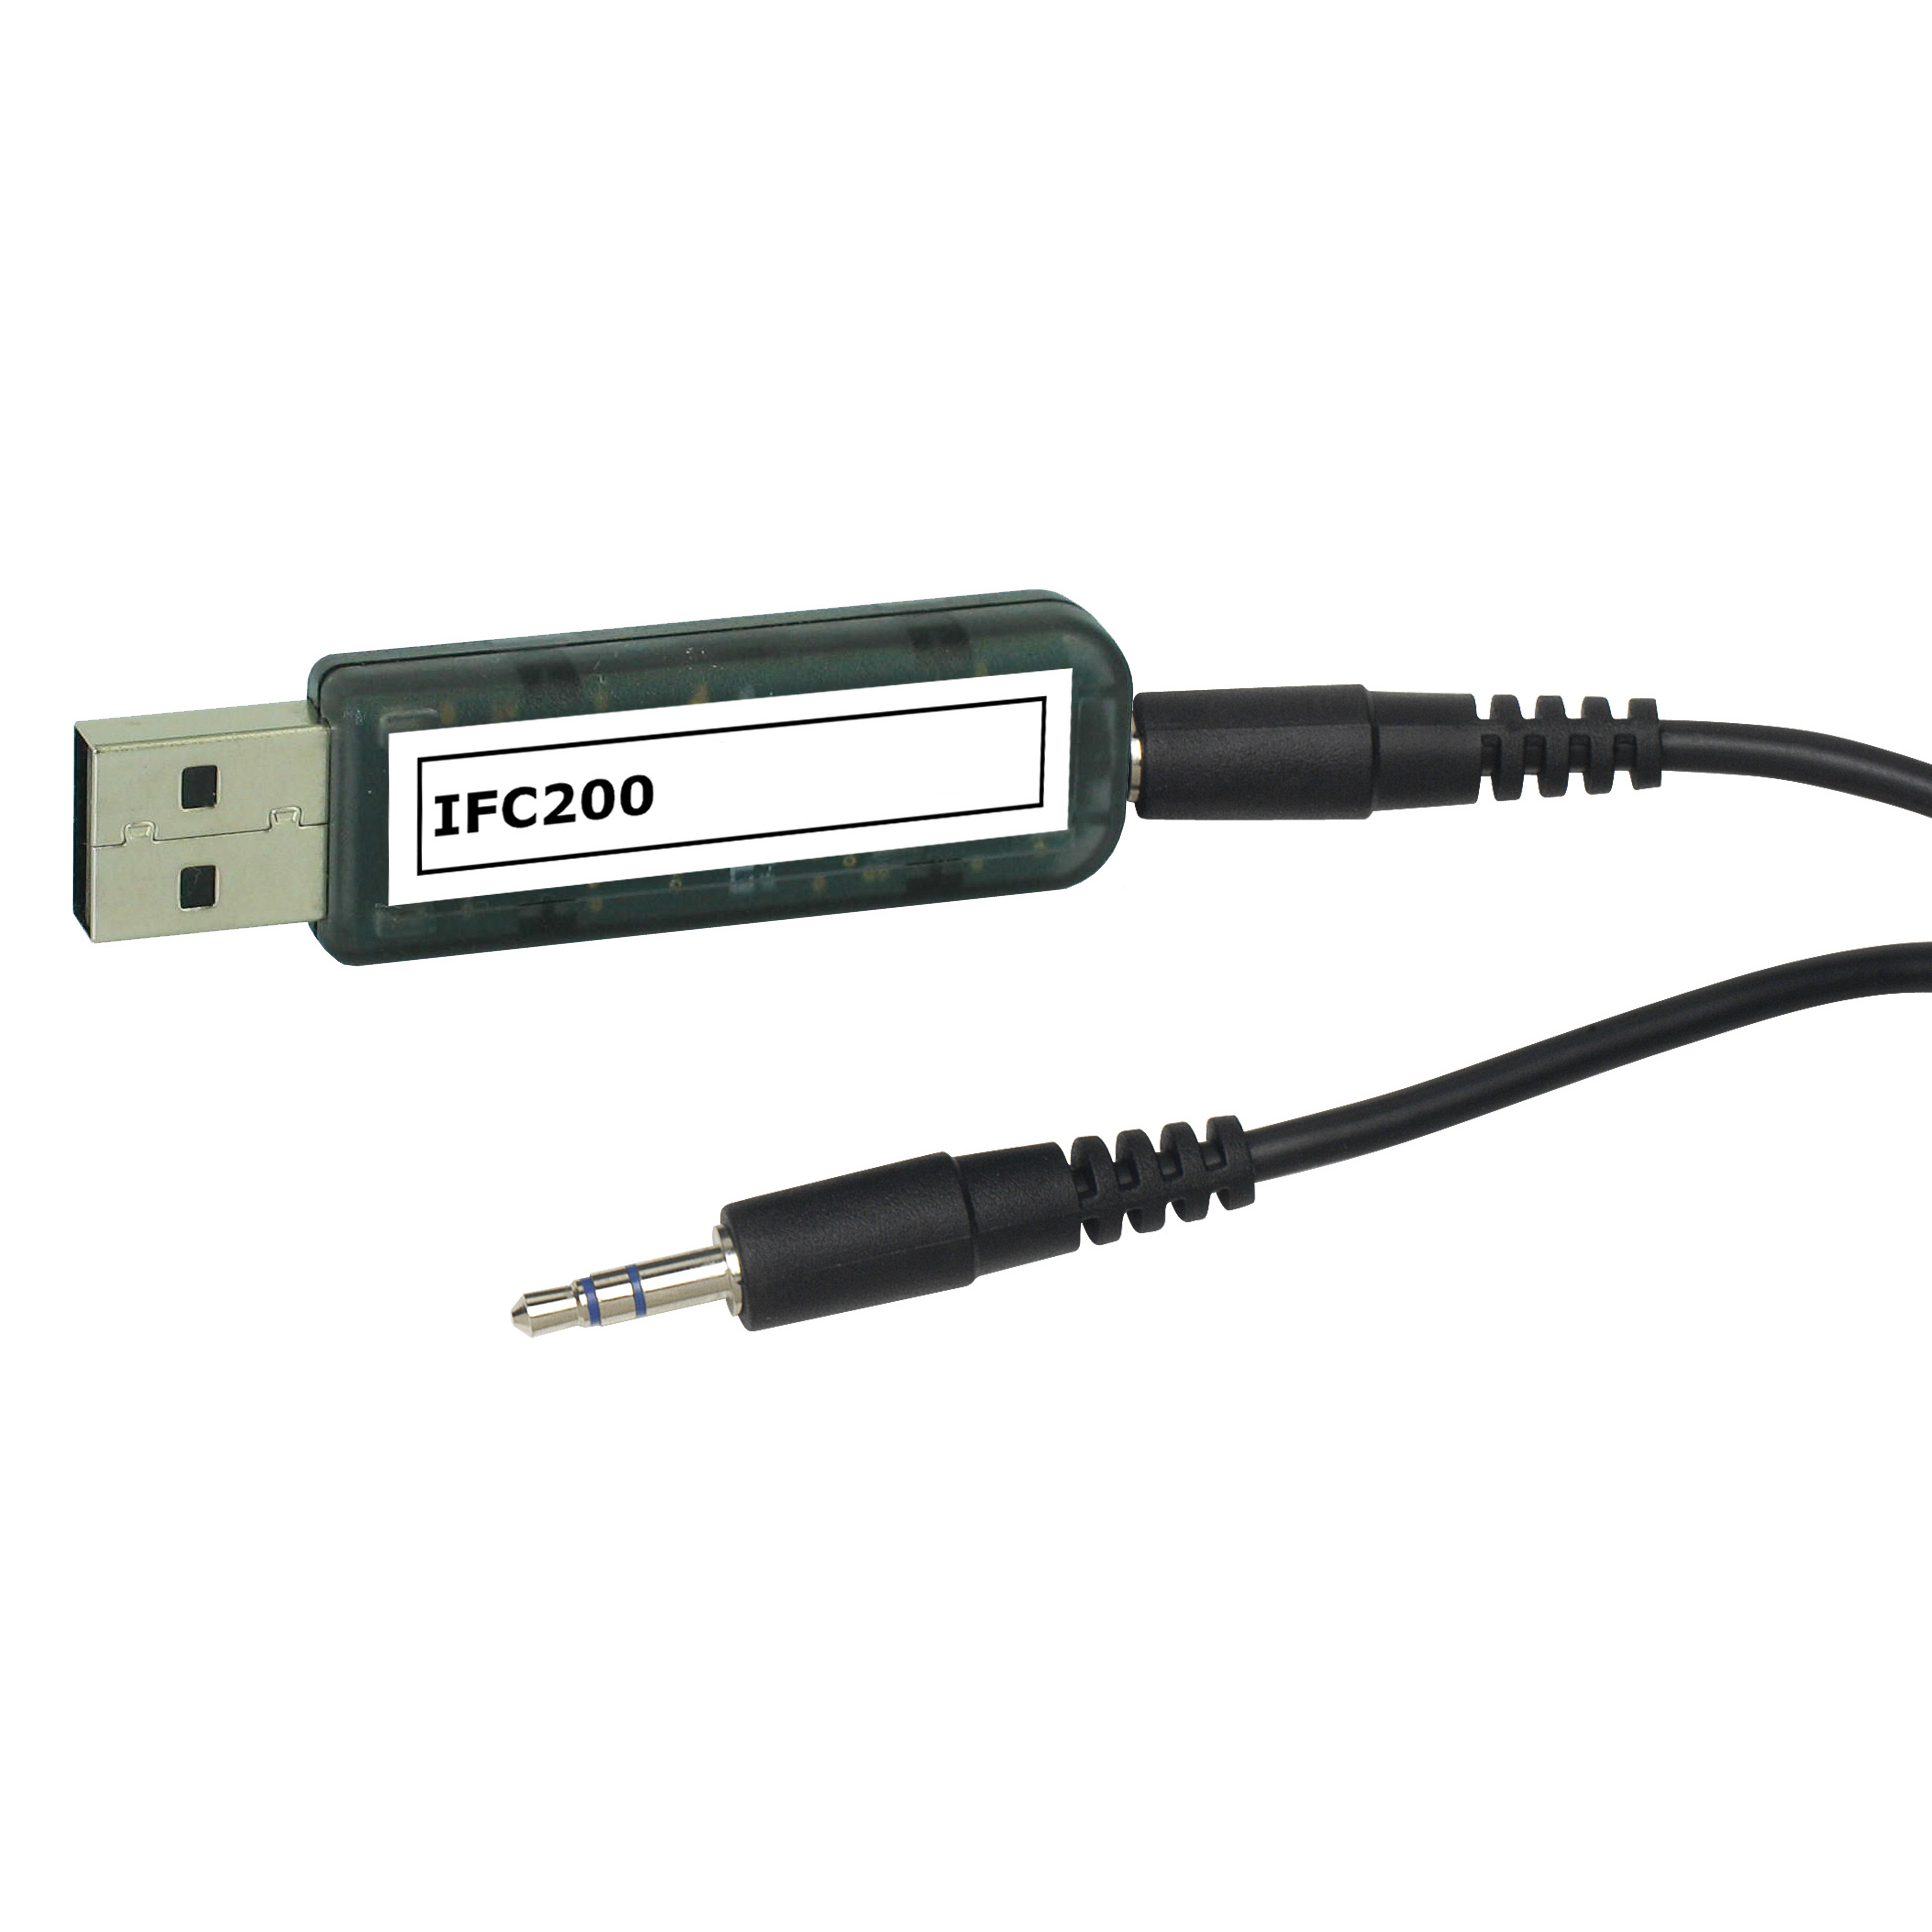 IFC200 - USB Interface Cable & Software Package